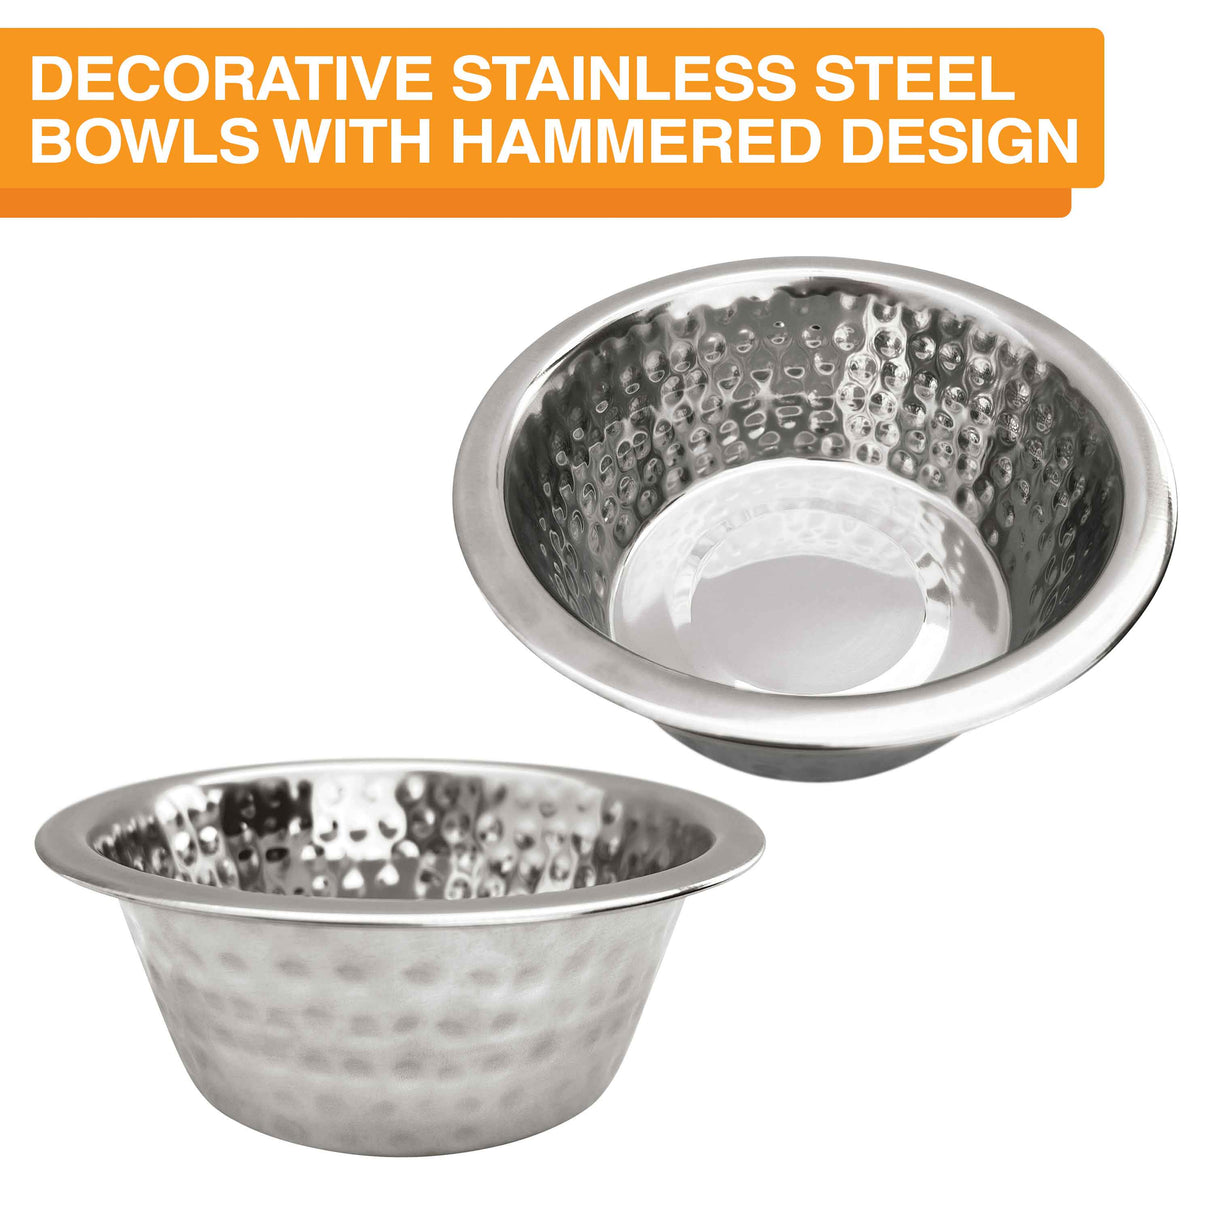 Includes stylish hammered bowls